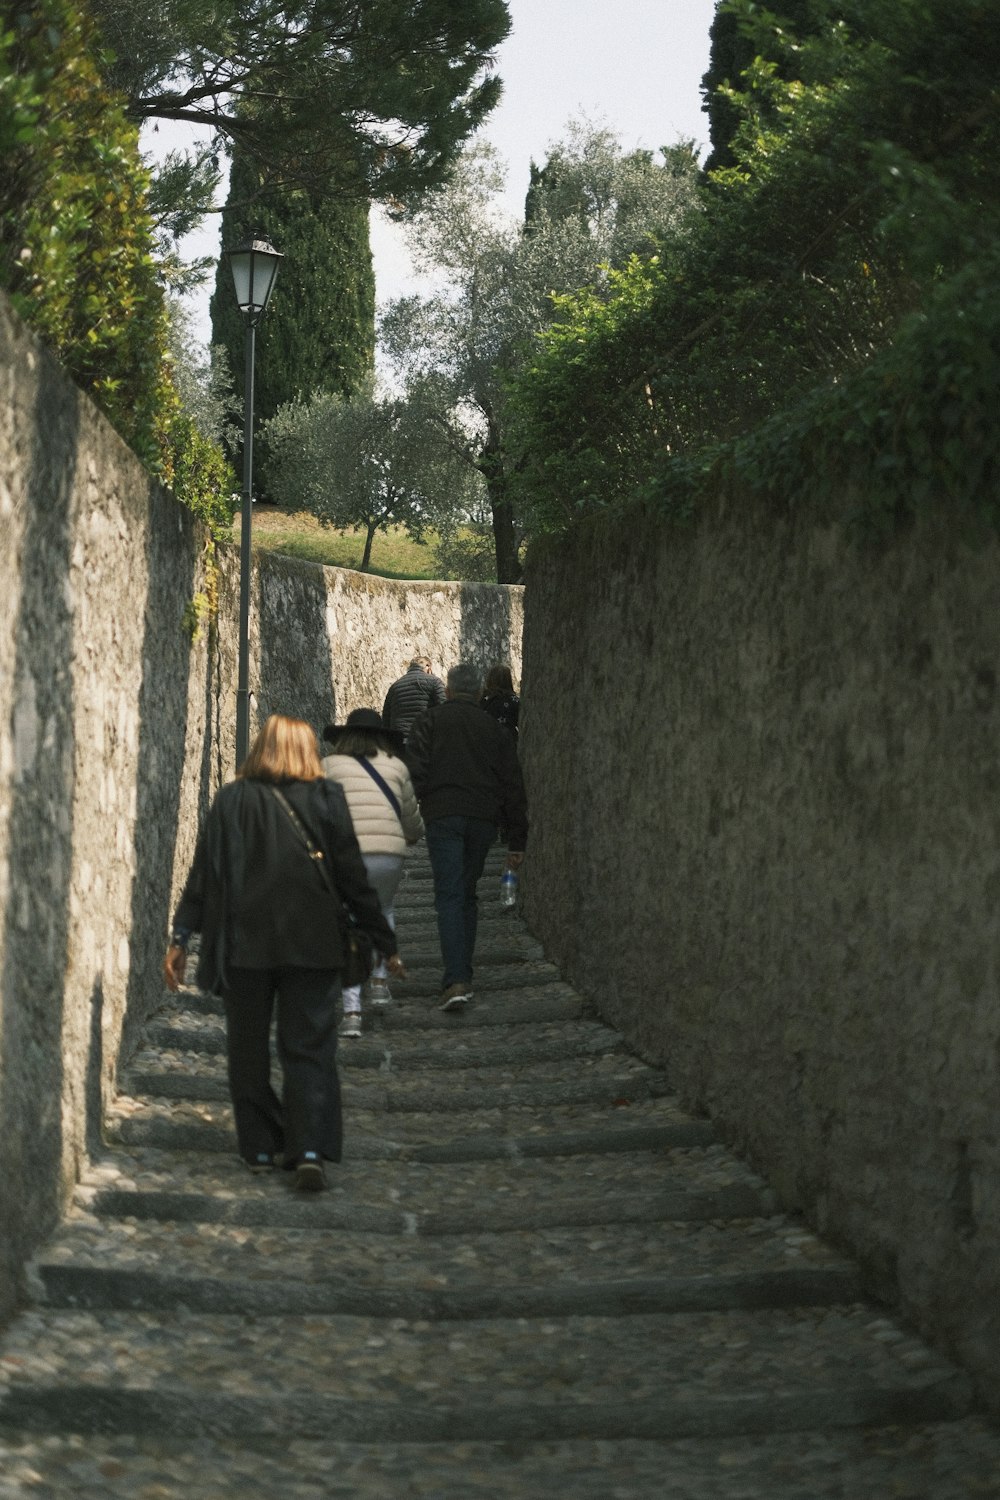 a group of people walking down a street next to a stone wall